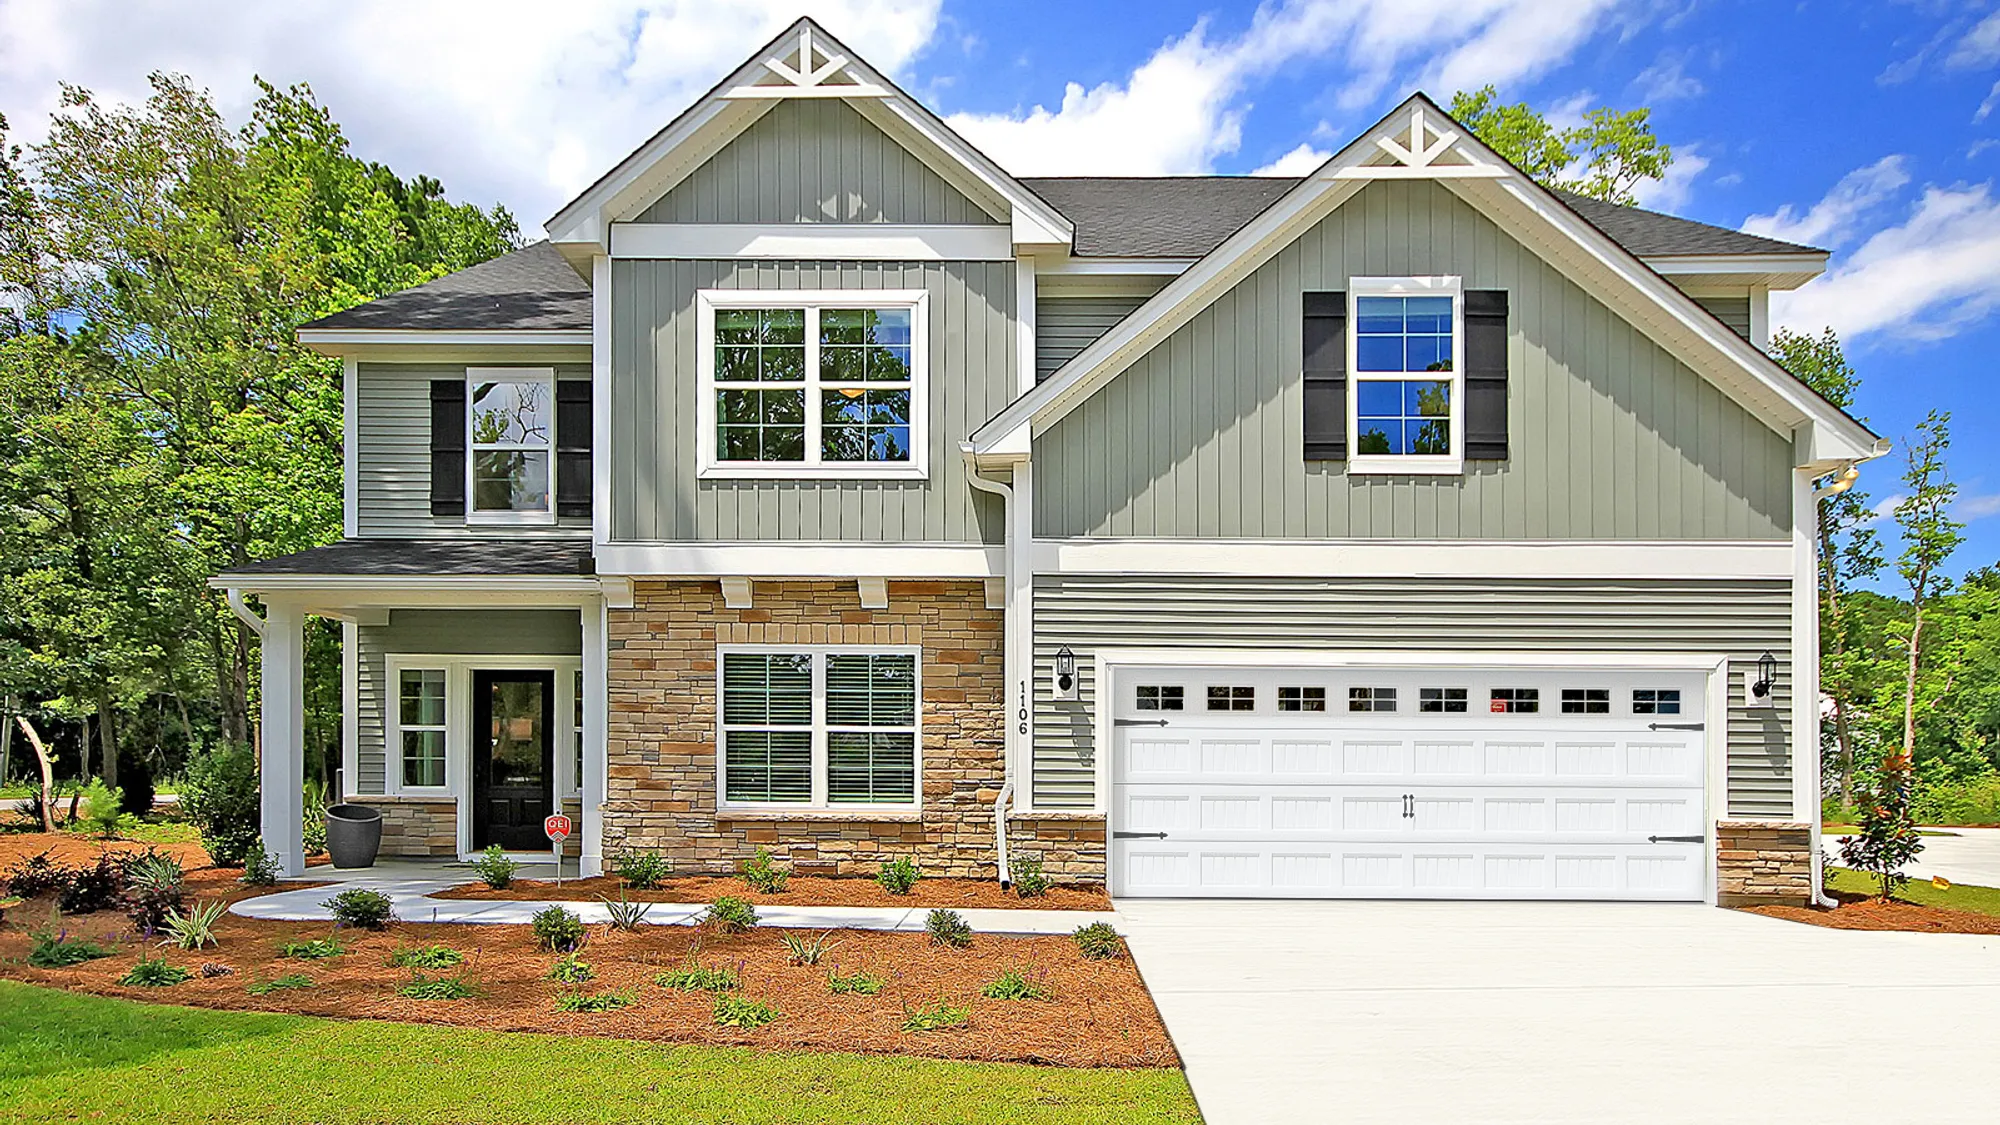 New home for sale in Easley with modern farmhouse design